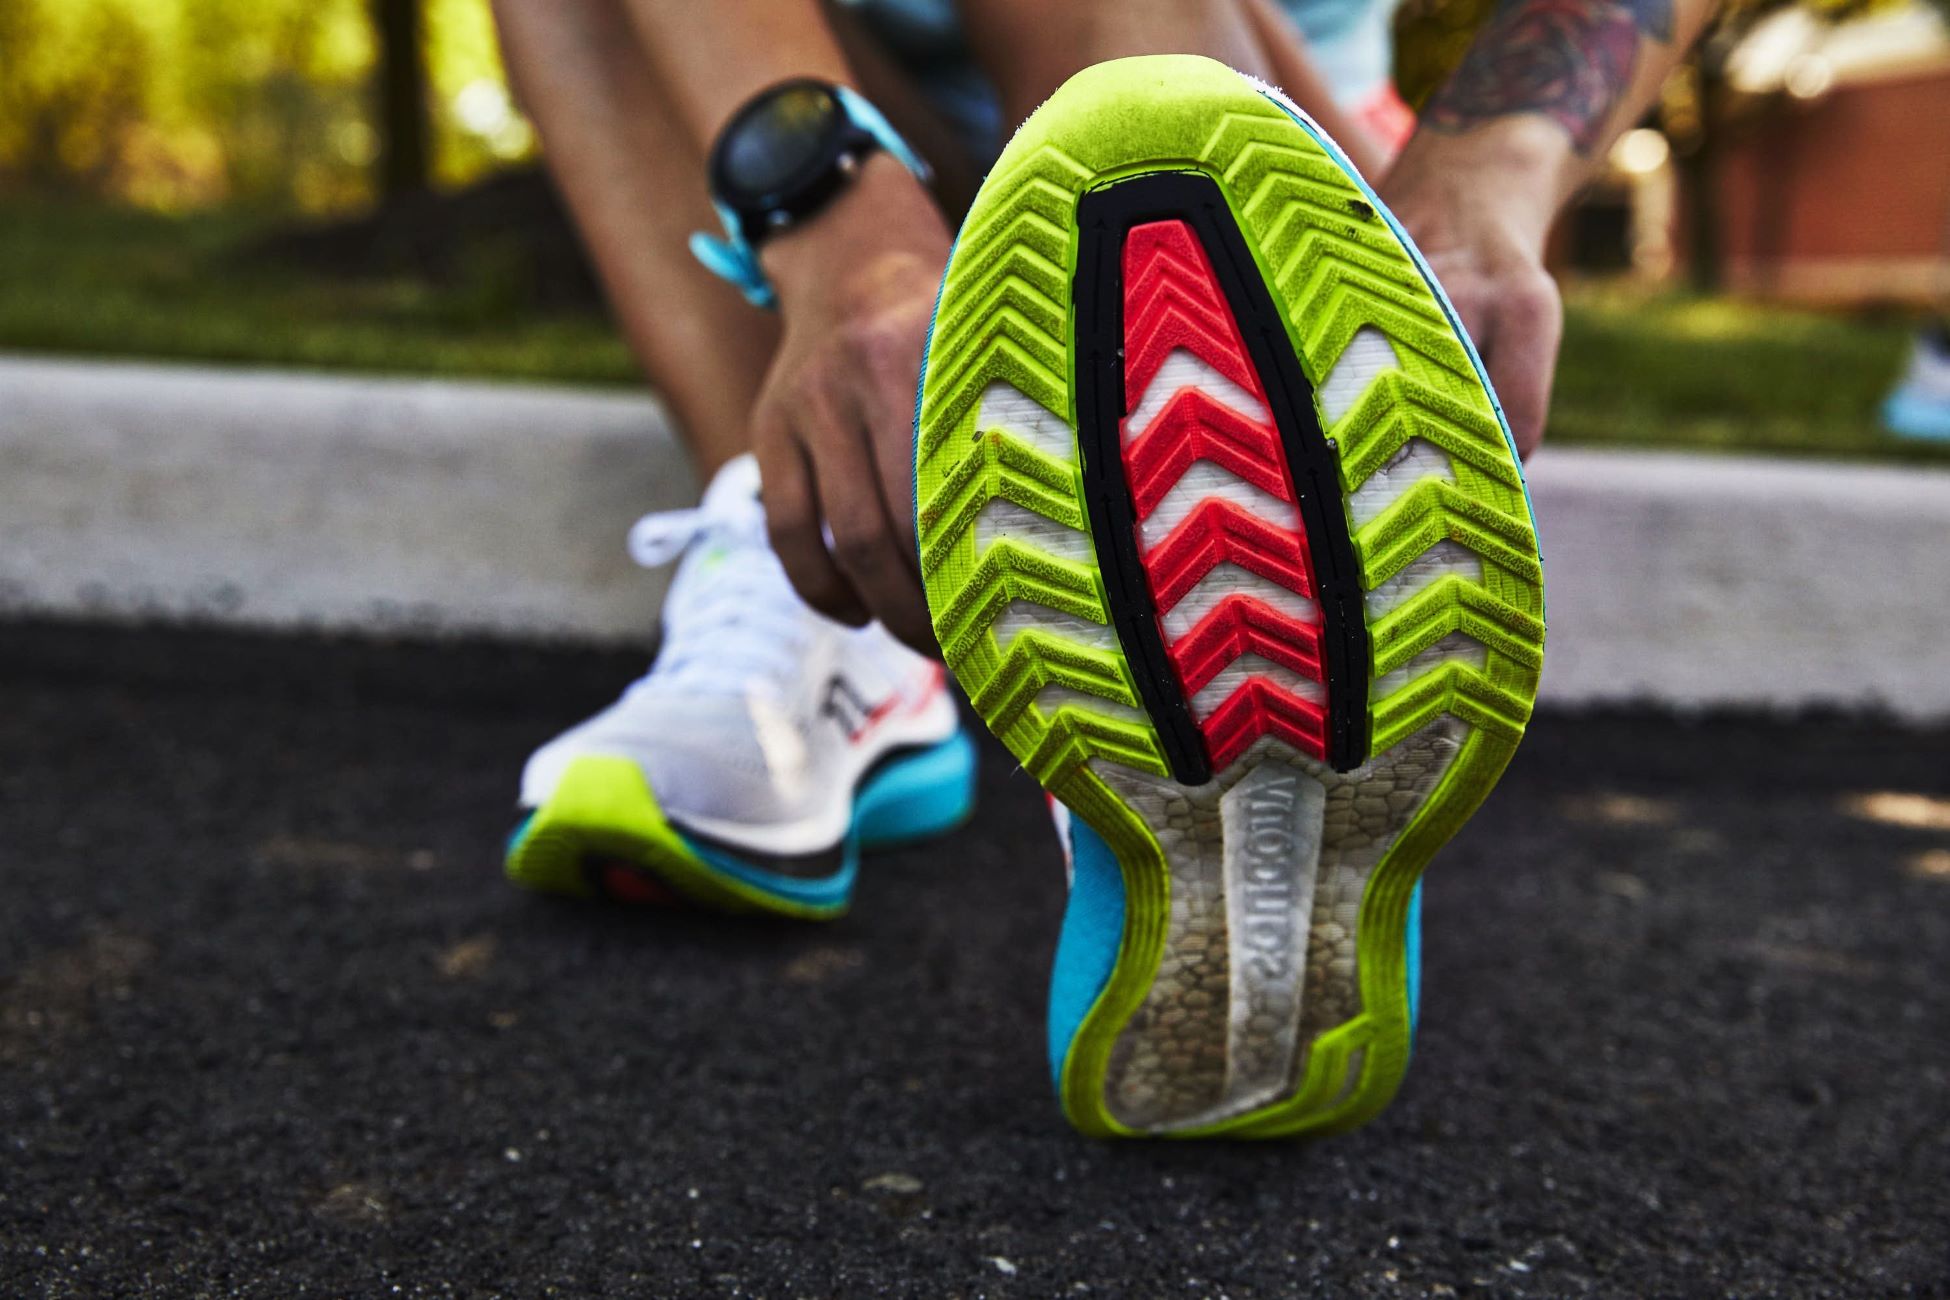 Enhance Your Running Efficiency And Technique With These Top 5 Form-Fixing Gadgets